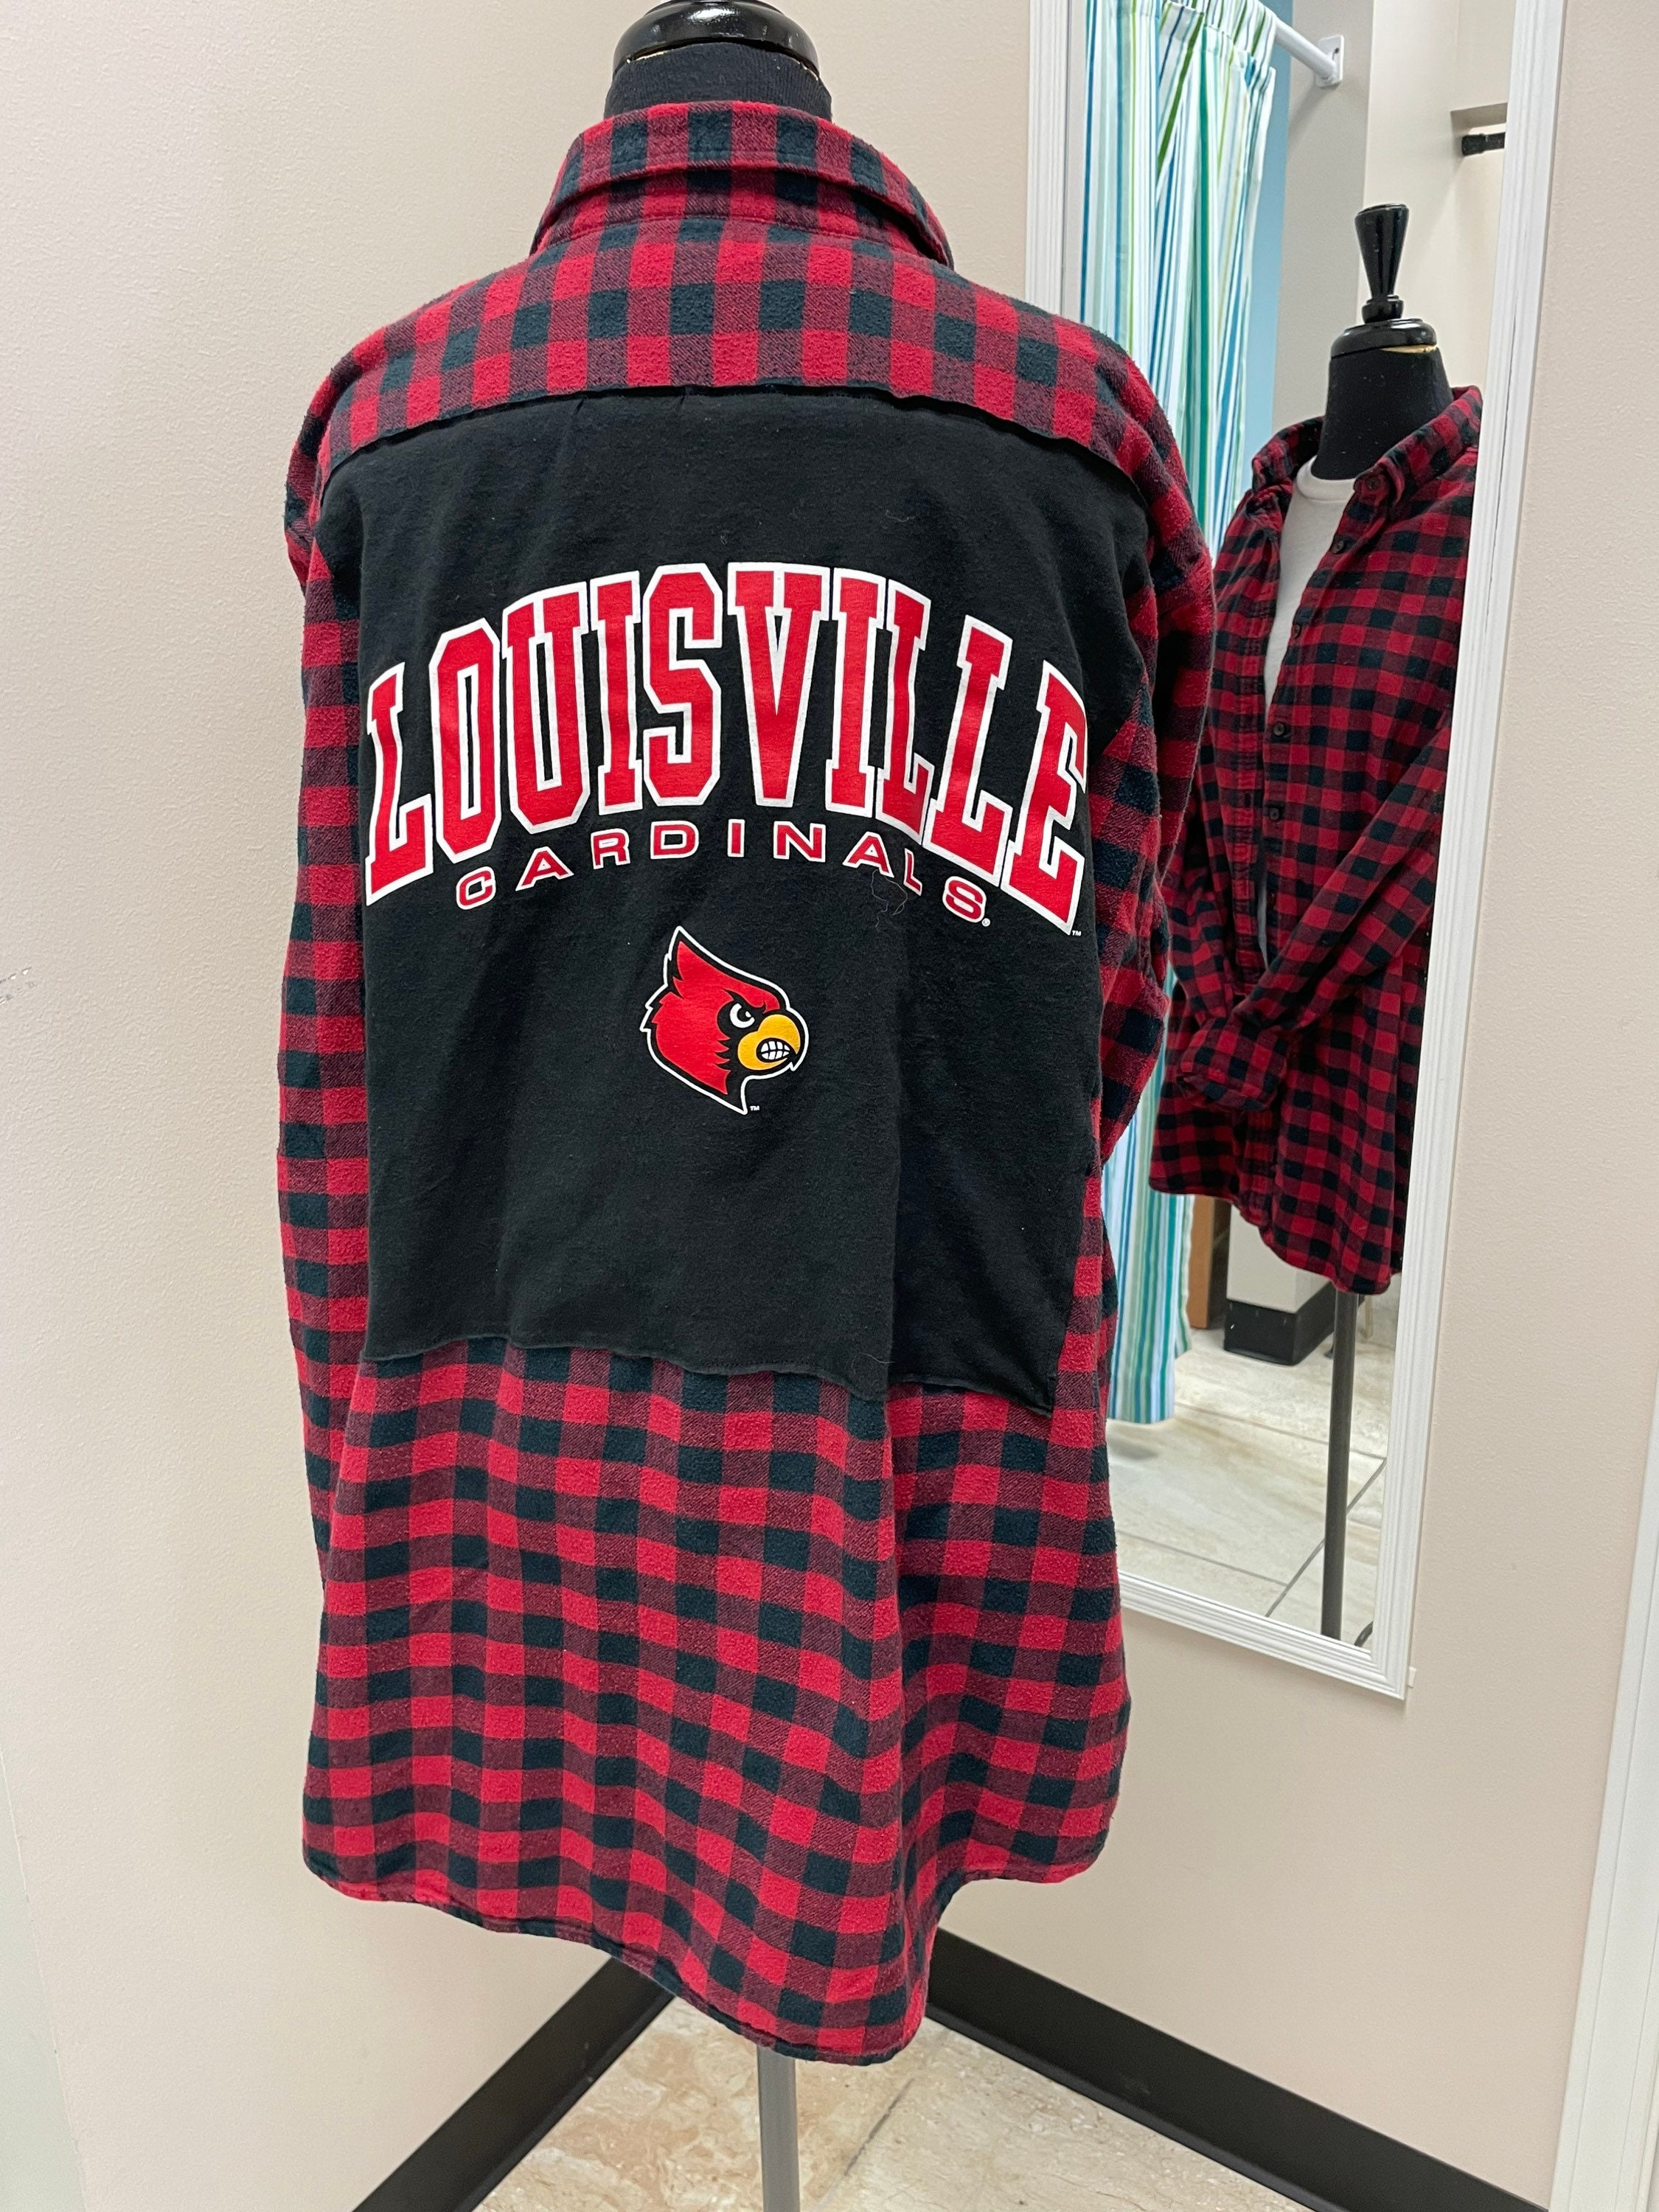 Cloth Hook and Eye 3.5 Dia. NCAA Louisville Cardinals University of Louisville Embroidered Patch | 52317